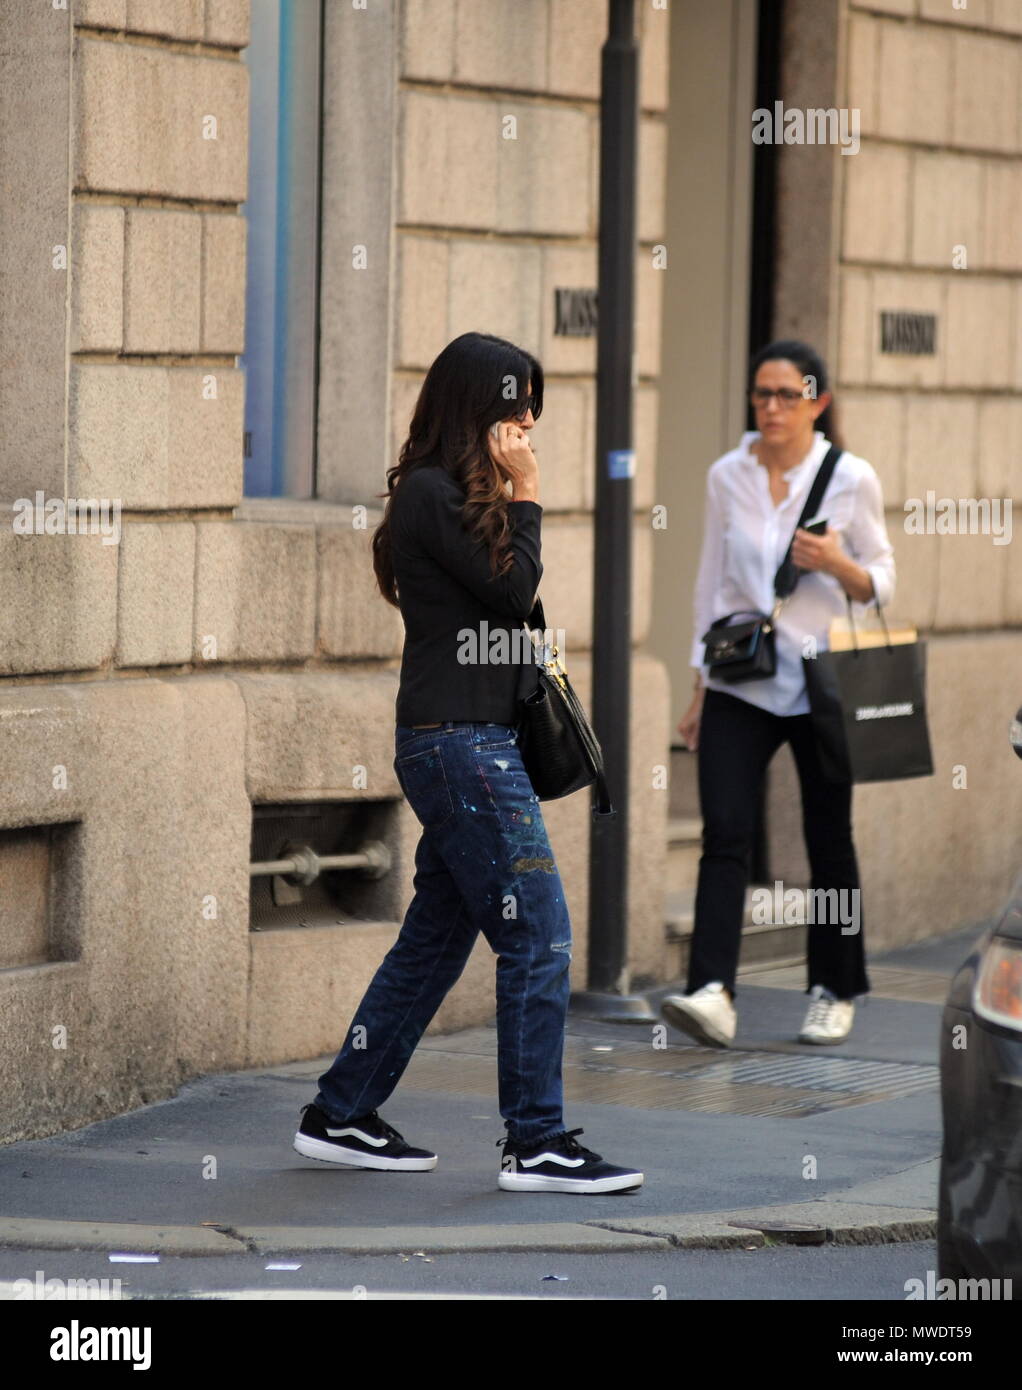 Milan, Sabrina Ferilli walks downtown alone Sabrina Ferilli arrives  downtown alone while talking on a cell phone, then goes shopping Stock  Photo - Alamy